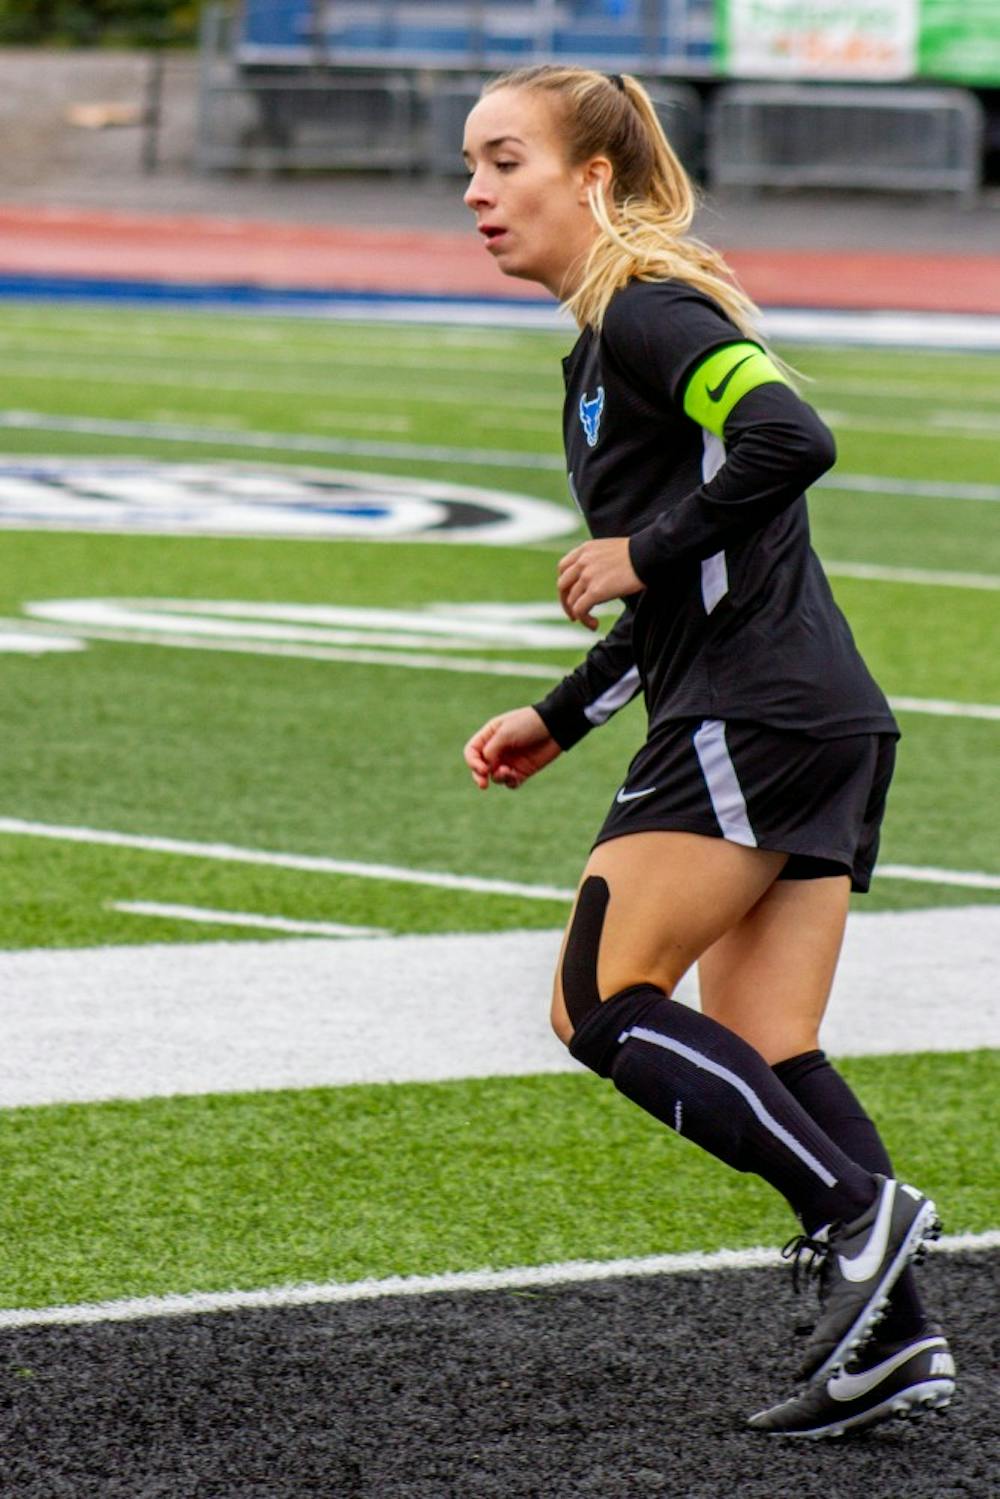 <p>Senior forward Carissima Cutrona runs on the pitch. Cutrona suffered a career-ending injury two weeks ago against Eastern Michigan and finishes her career as sixth-overall in points at UB.</p>